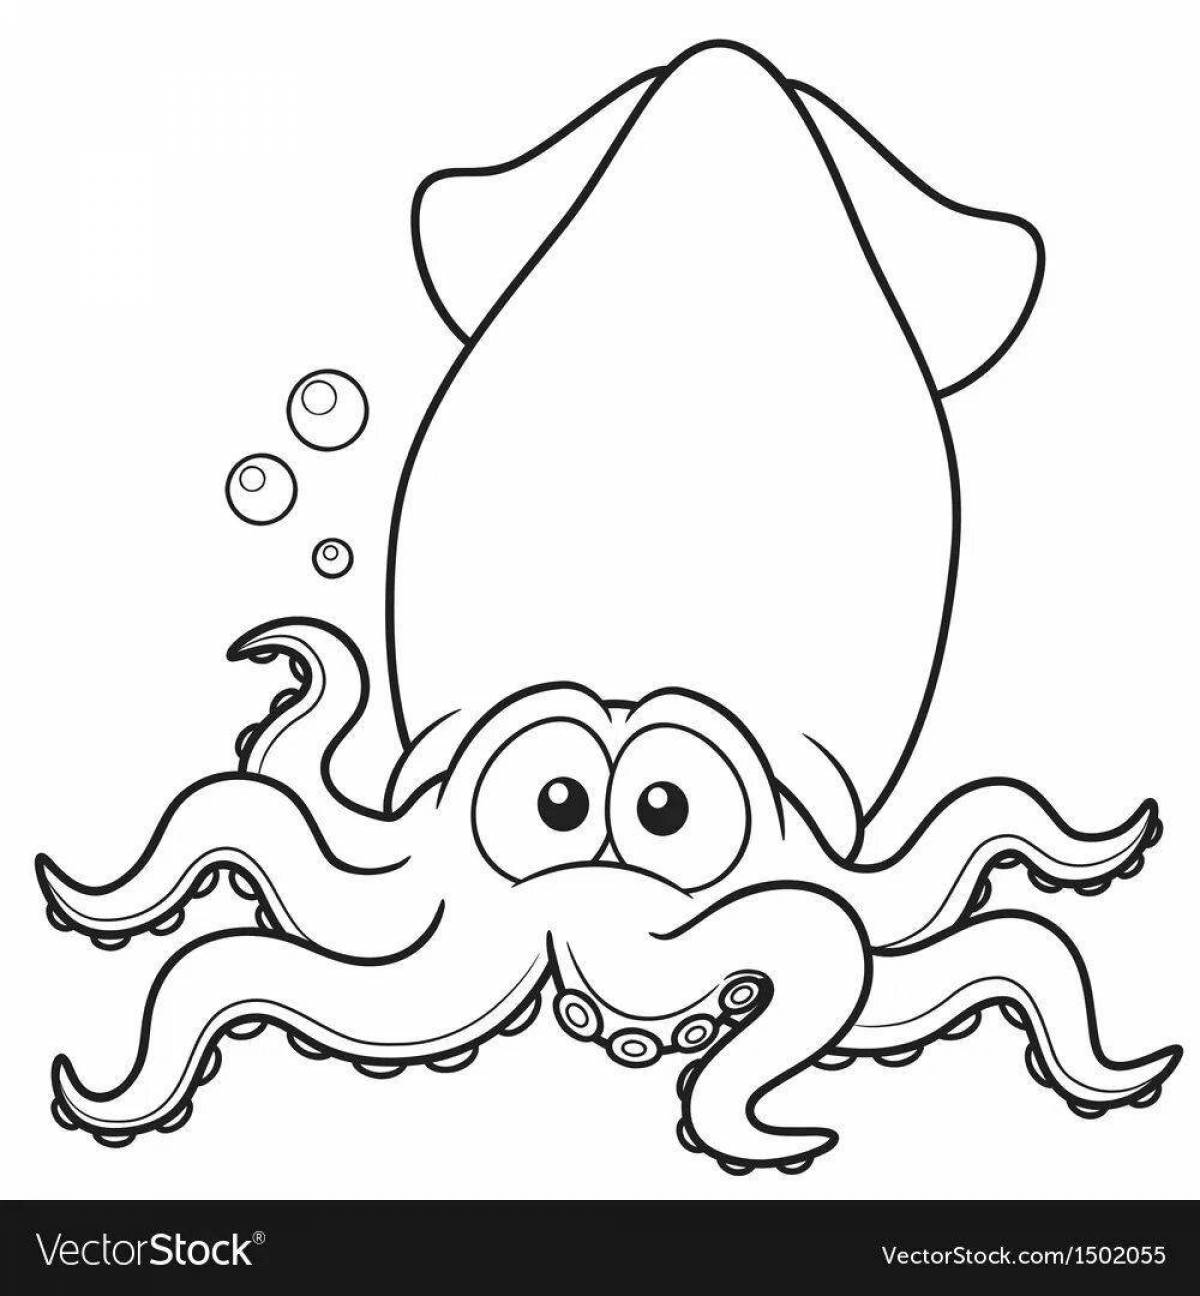 Great squid coloring book for kids